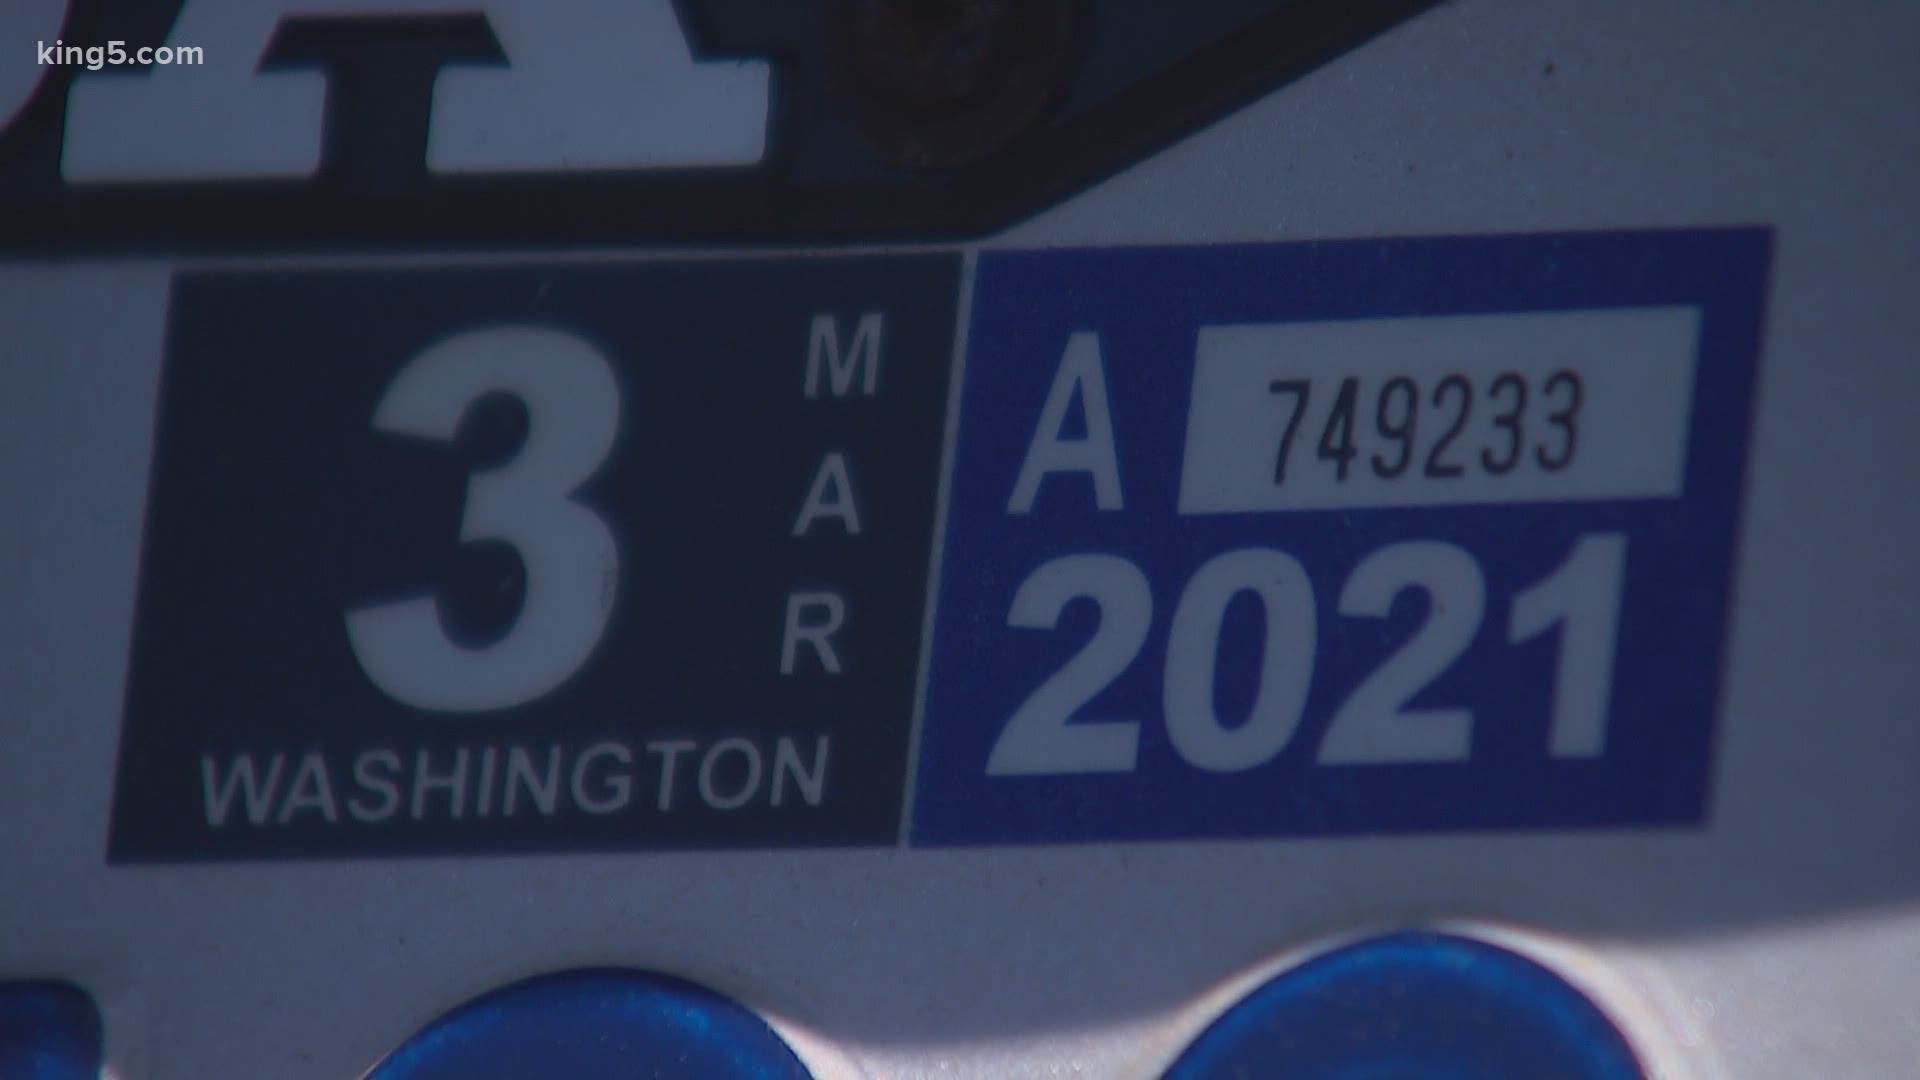 Washington residents facing job loss or furloughs currently cannot expect relief for steep car tab expenses, though Gov. Inslee said he'd consider that.